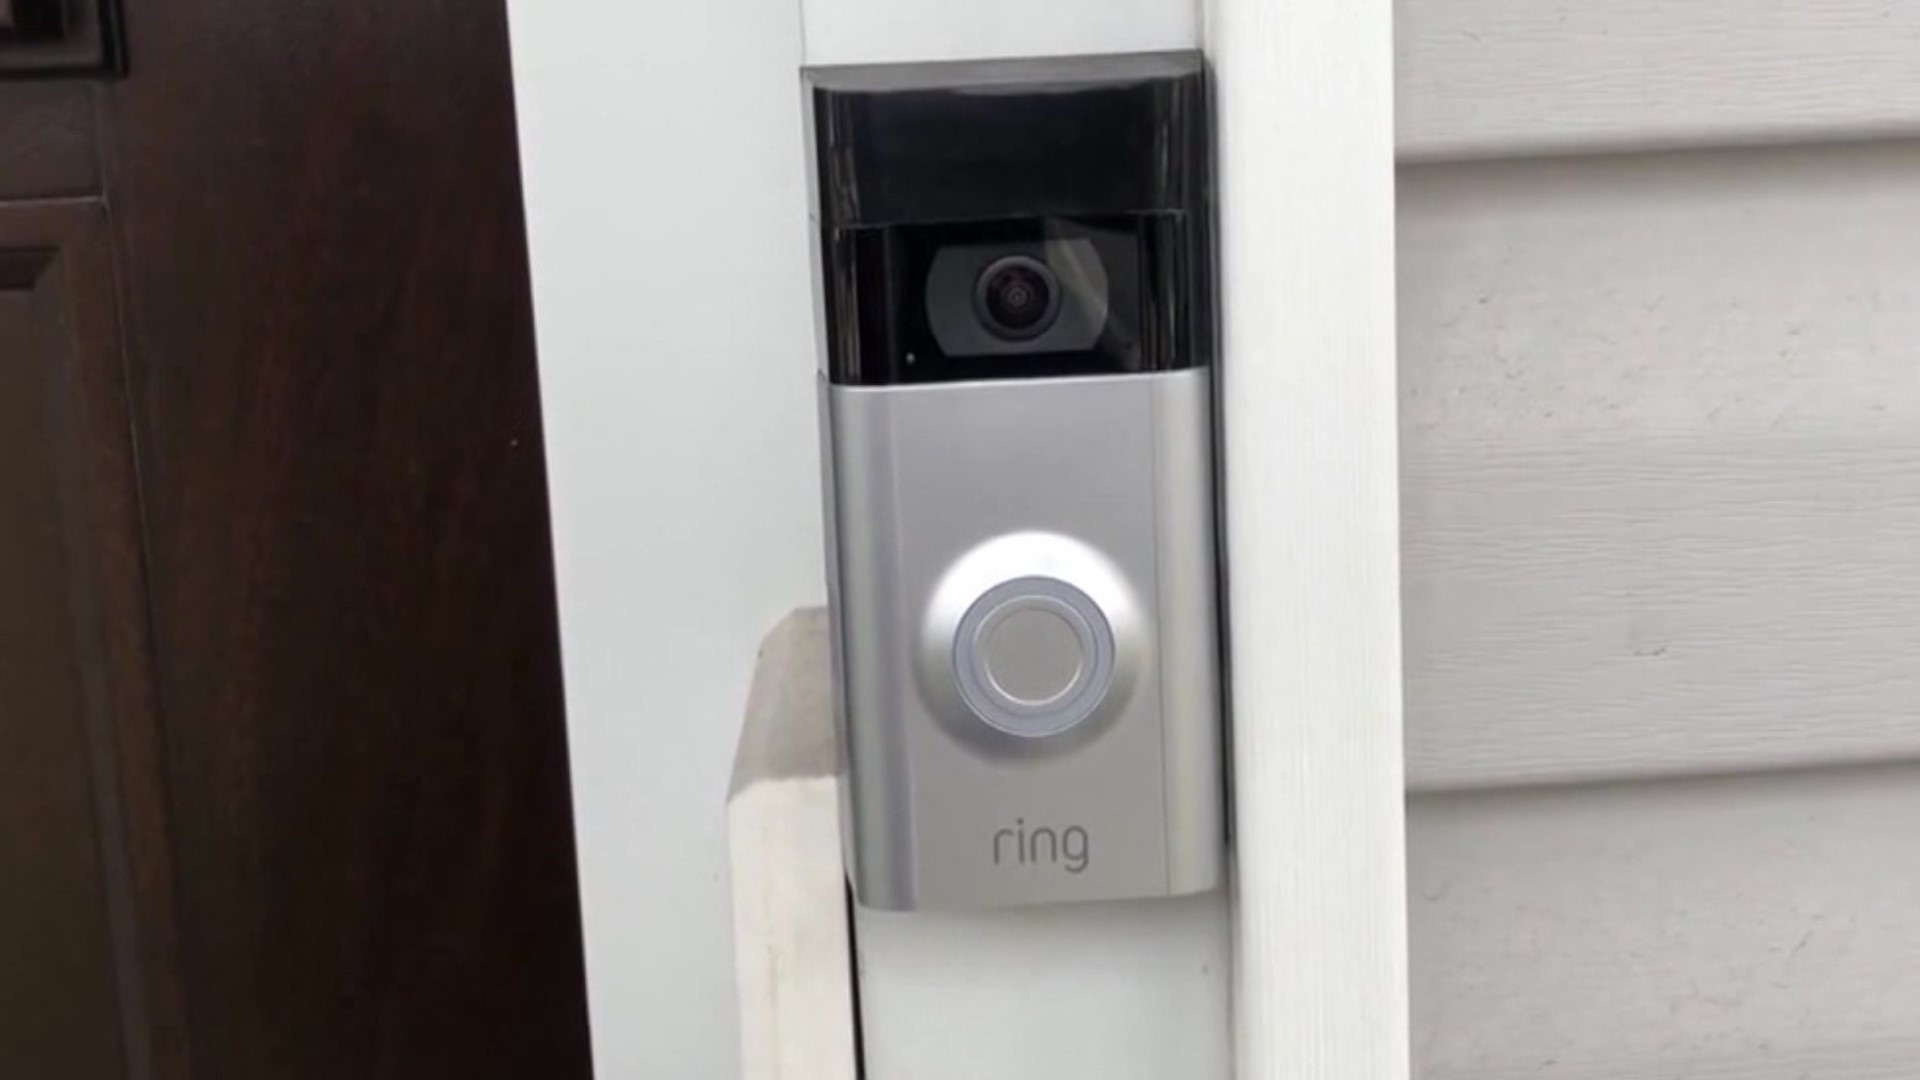 Do People Caught on Ring Cameras Have Privacy Rights?